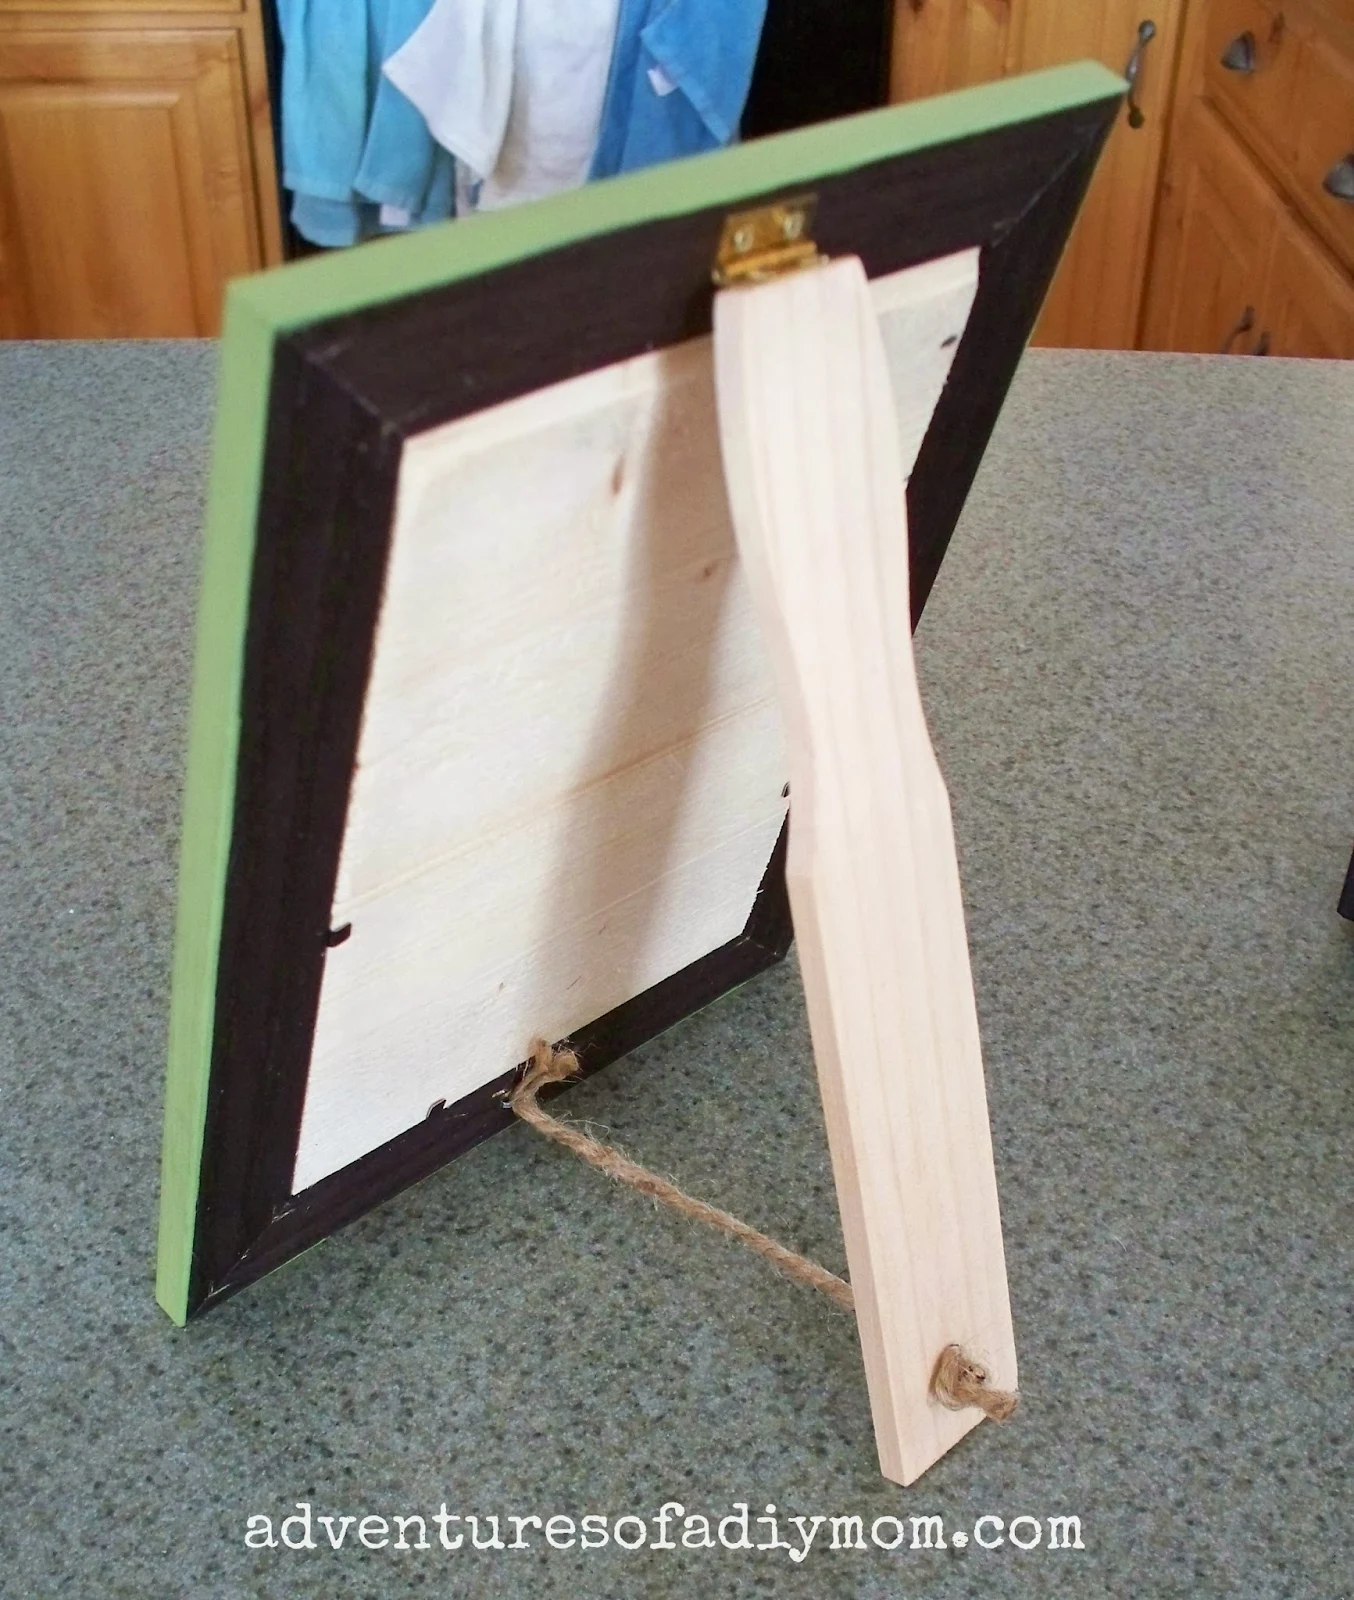 How to Make a beadboard picture Frame